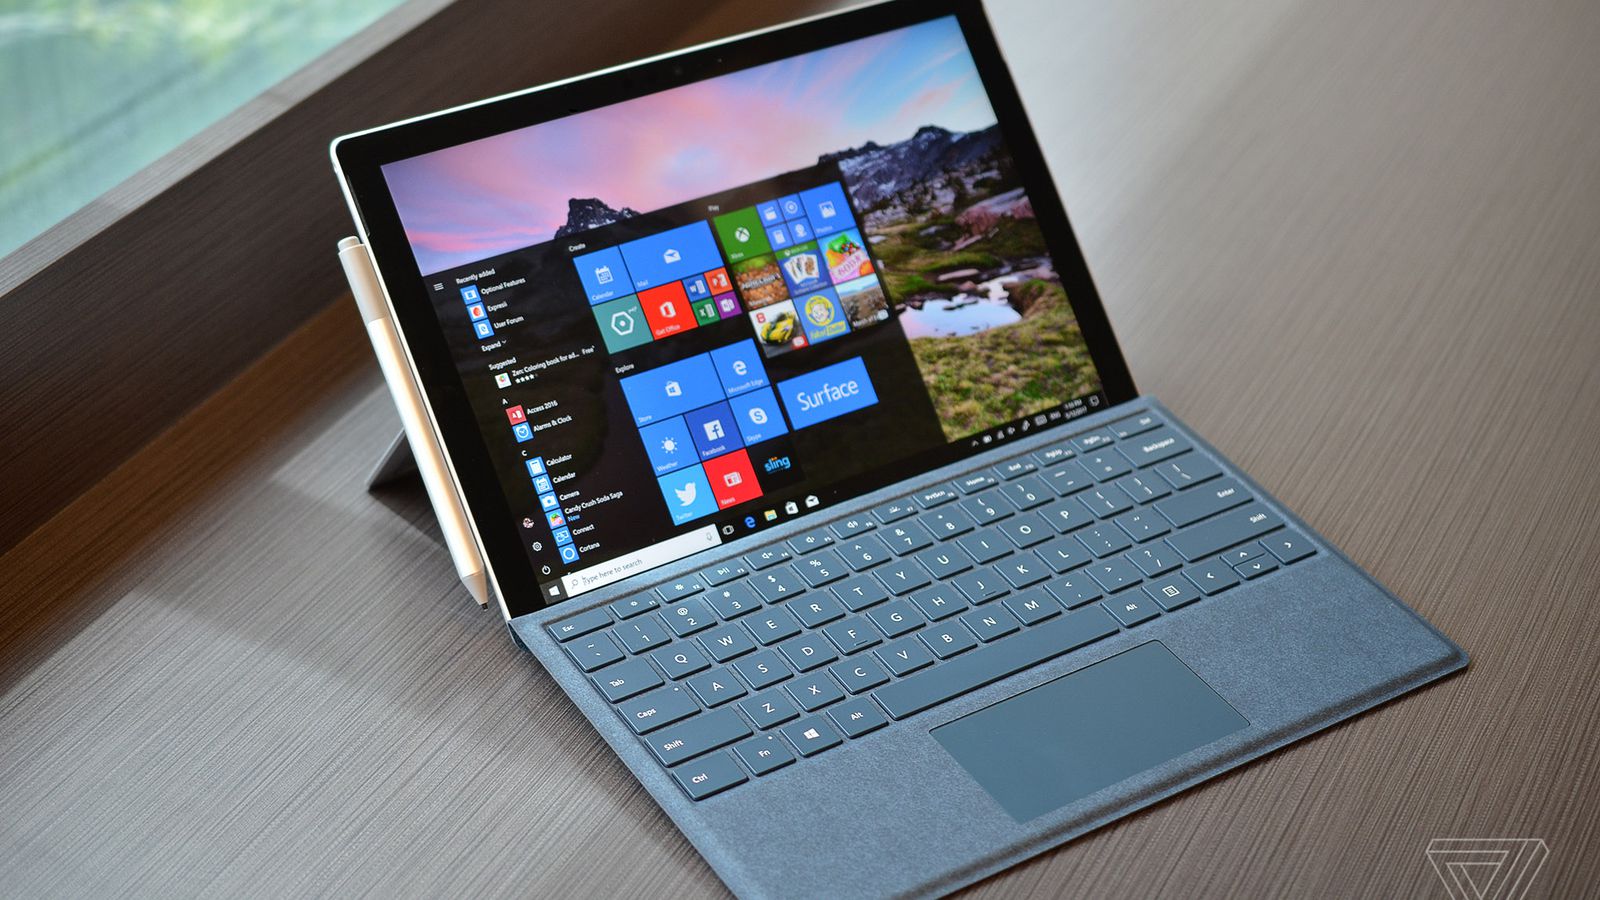 Microsoft's new Surface Pro has 13.5 hours of battery life and LTE